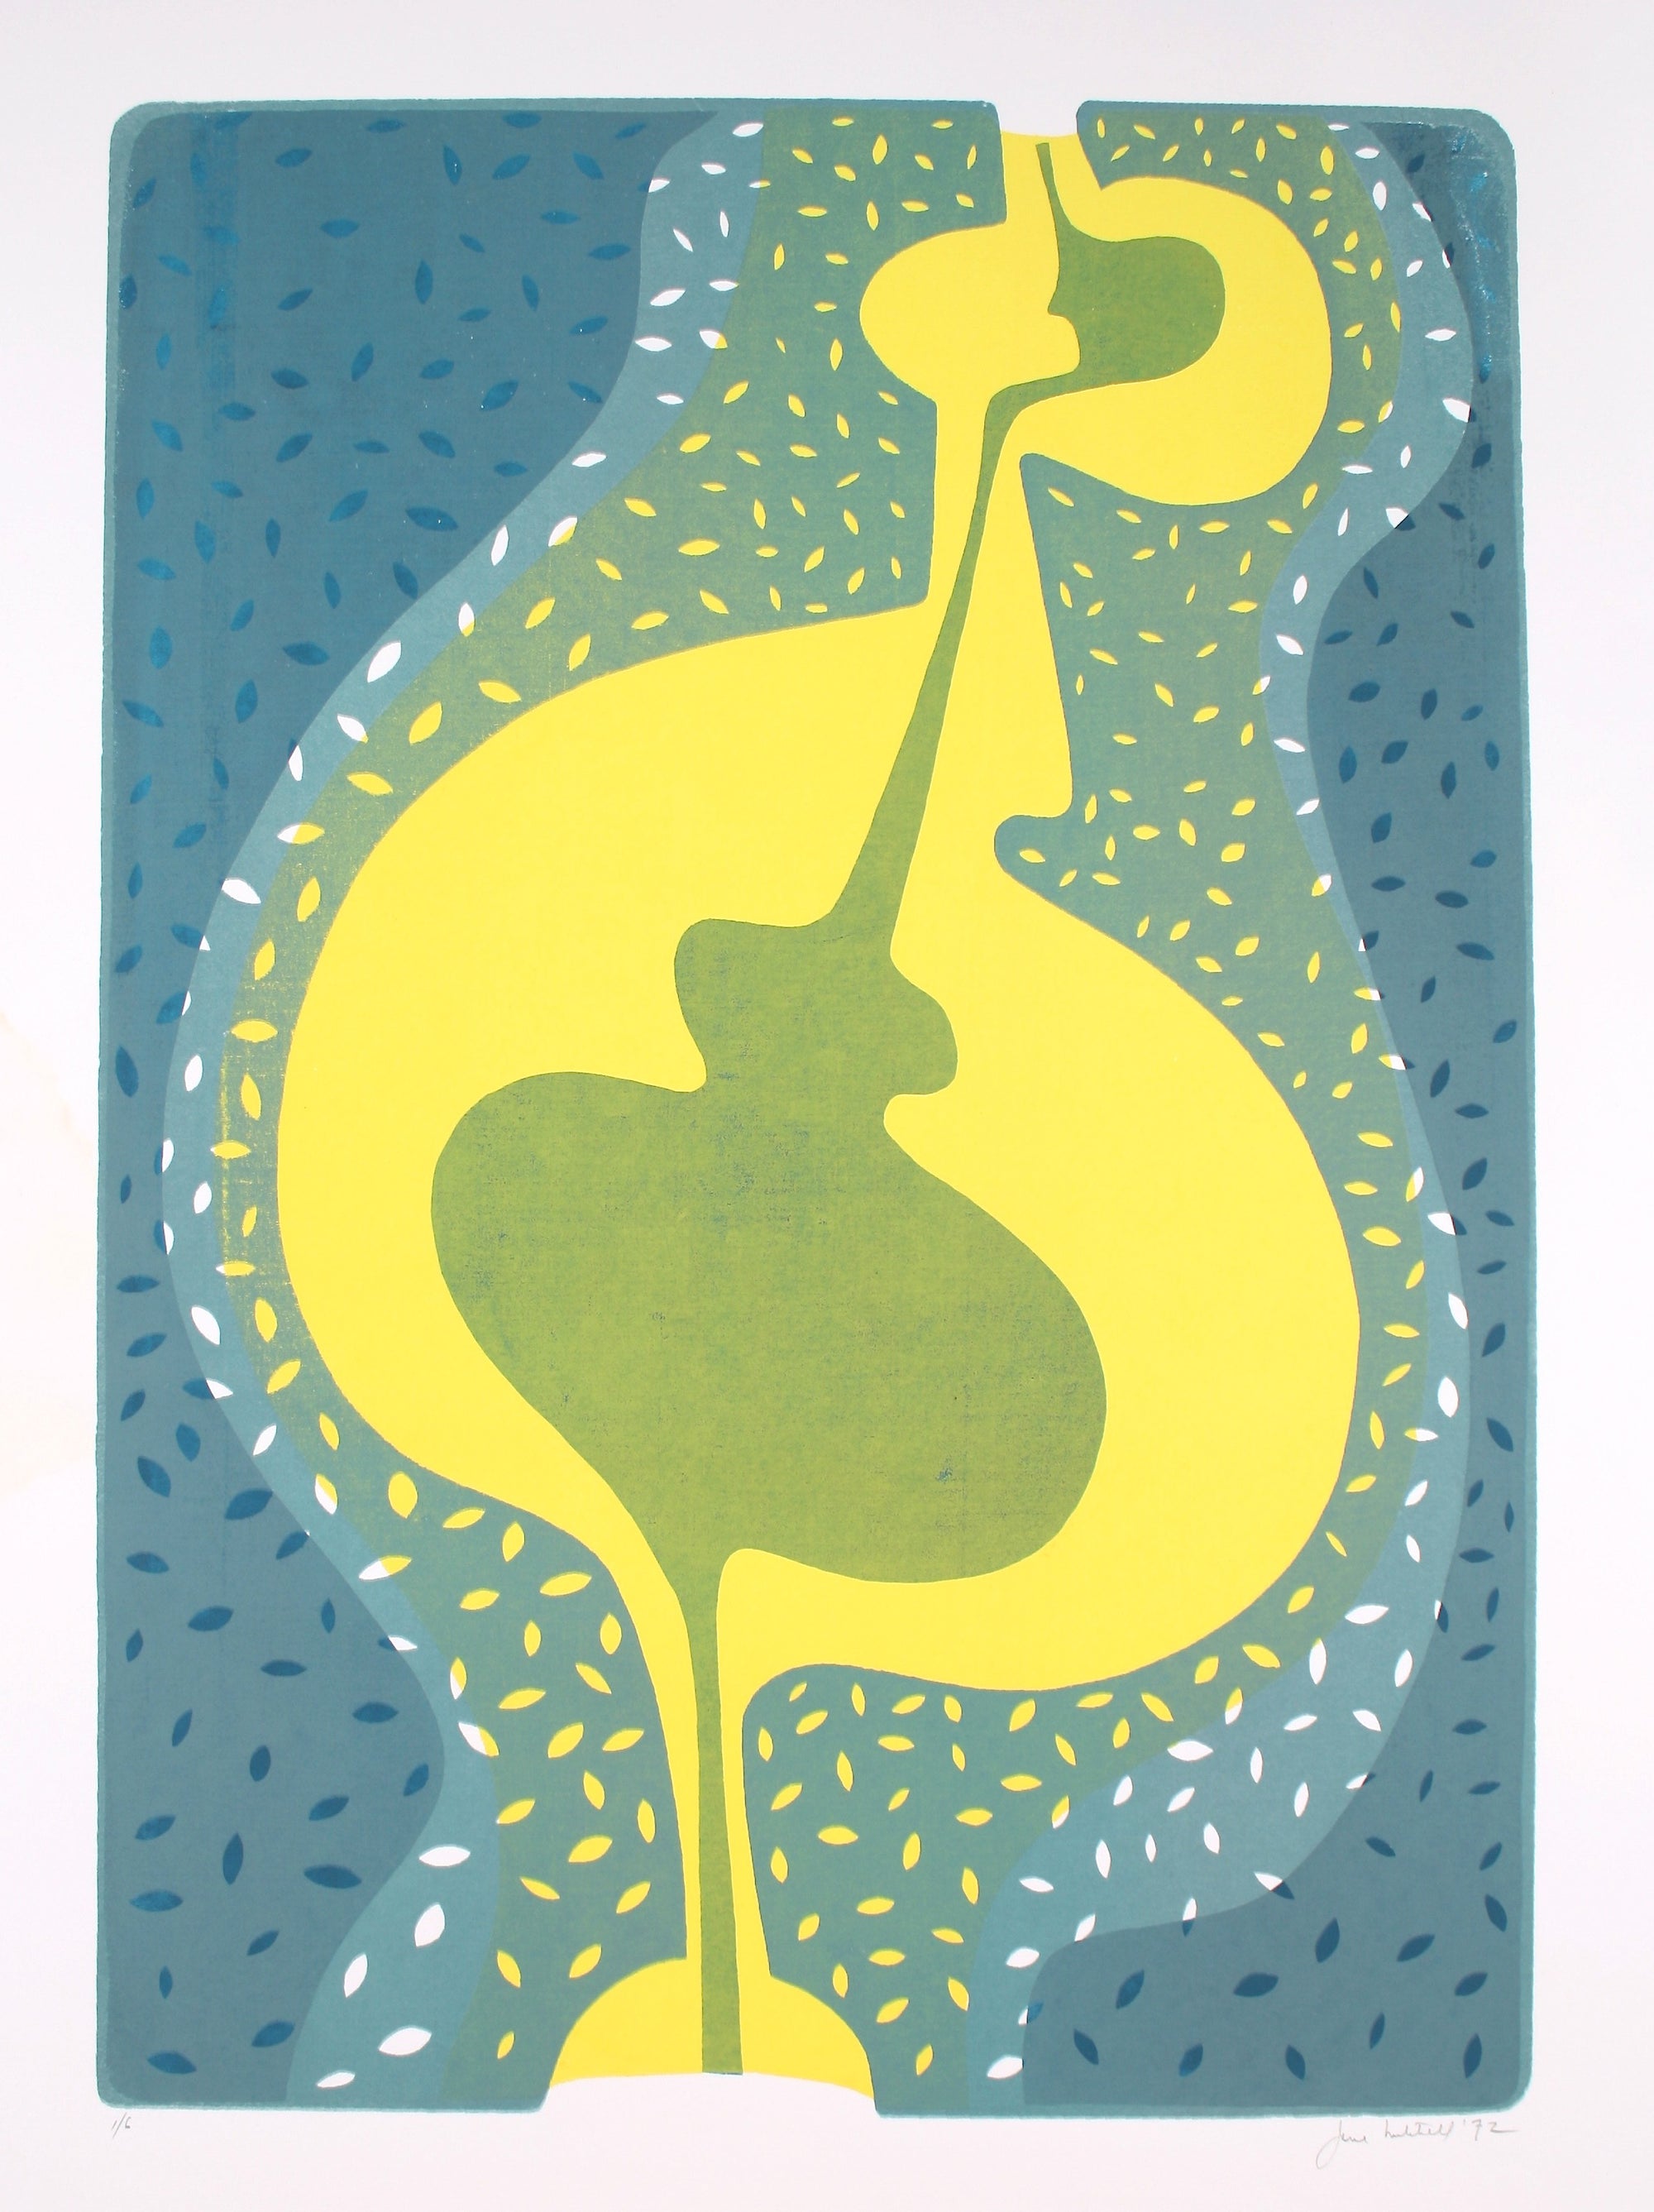 Green & Yellow Abstracted Forms <br>1972 Serigraph <br><br>#71900